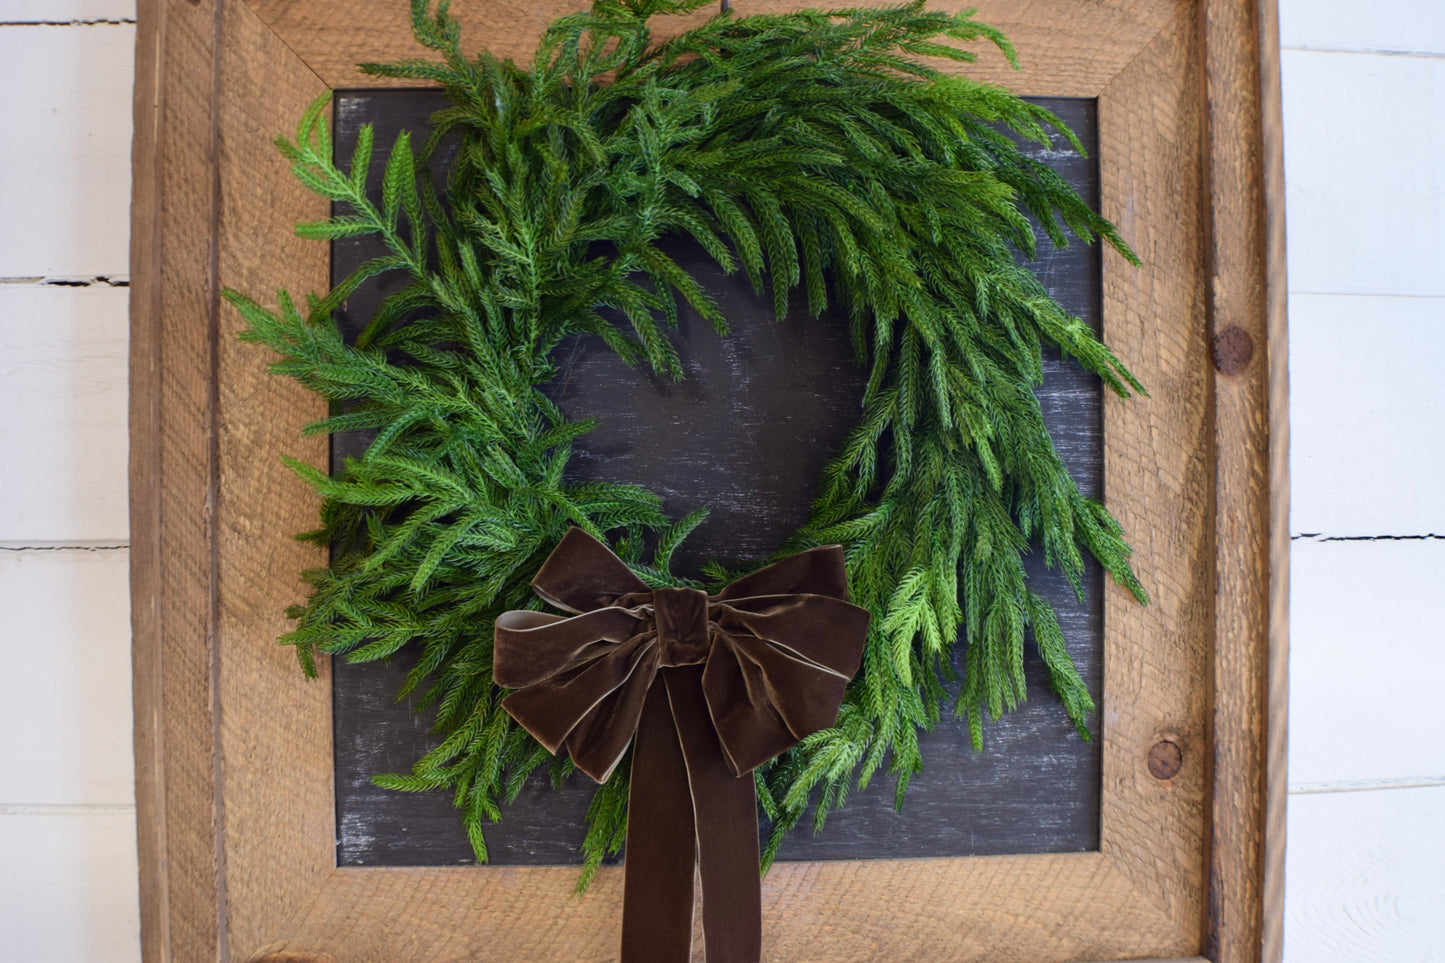 Faux Norfolk Pine Wreath with Velvet Bow